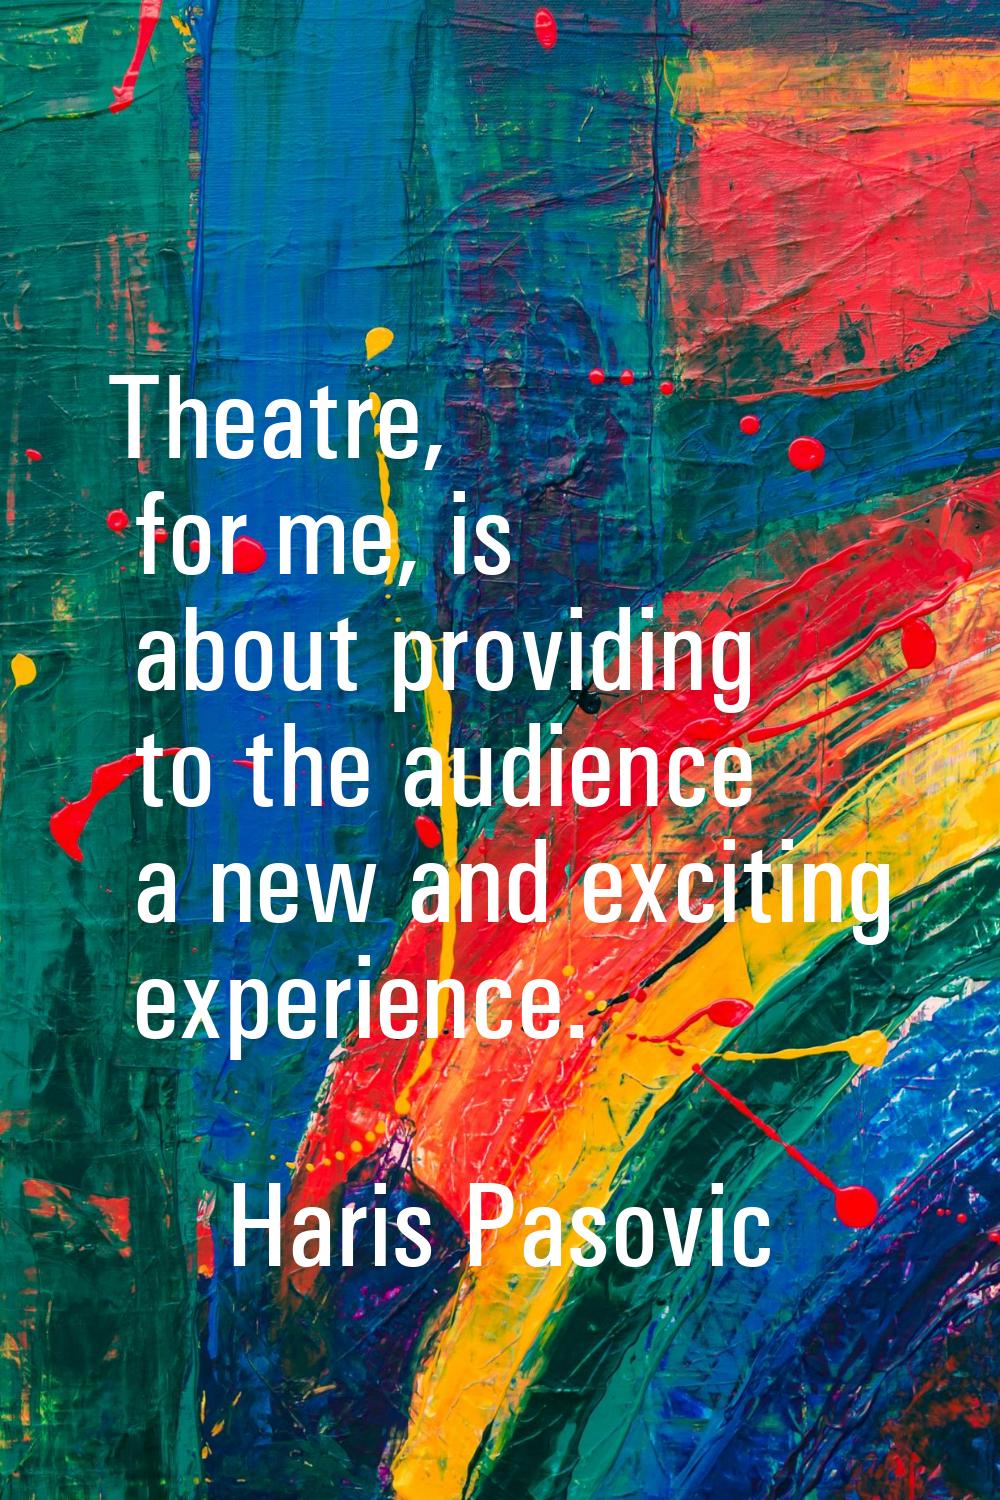 Theatre, for me, is about providing to the audience a new and exciting experience.